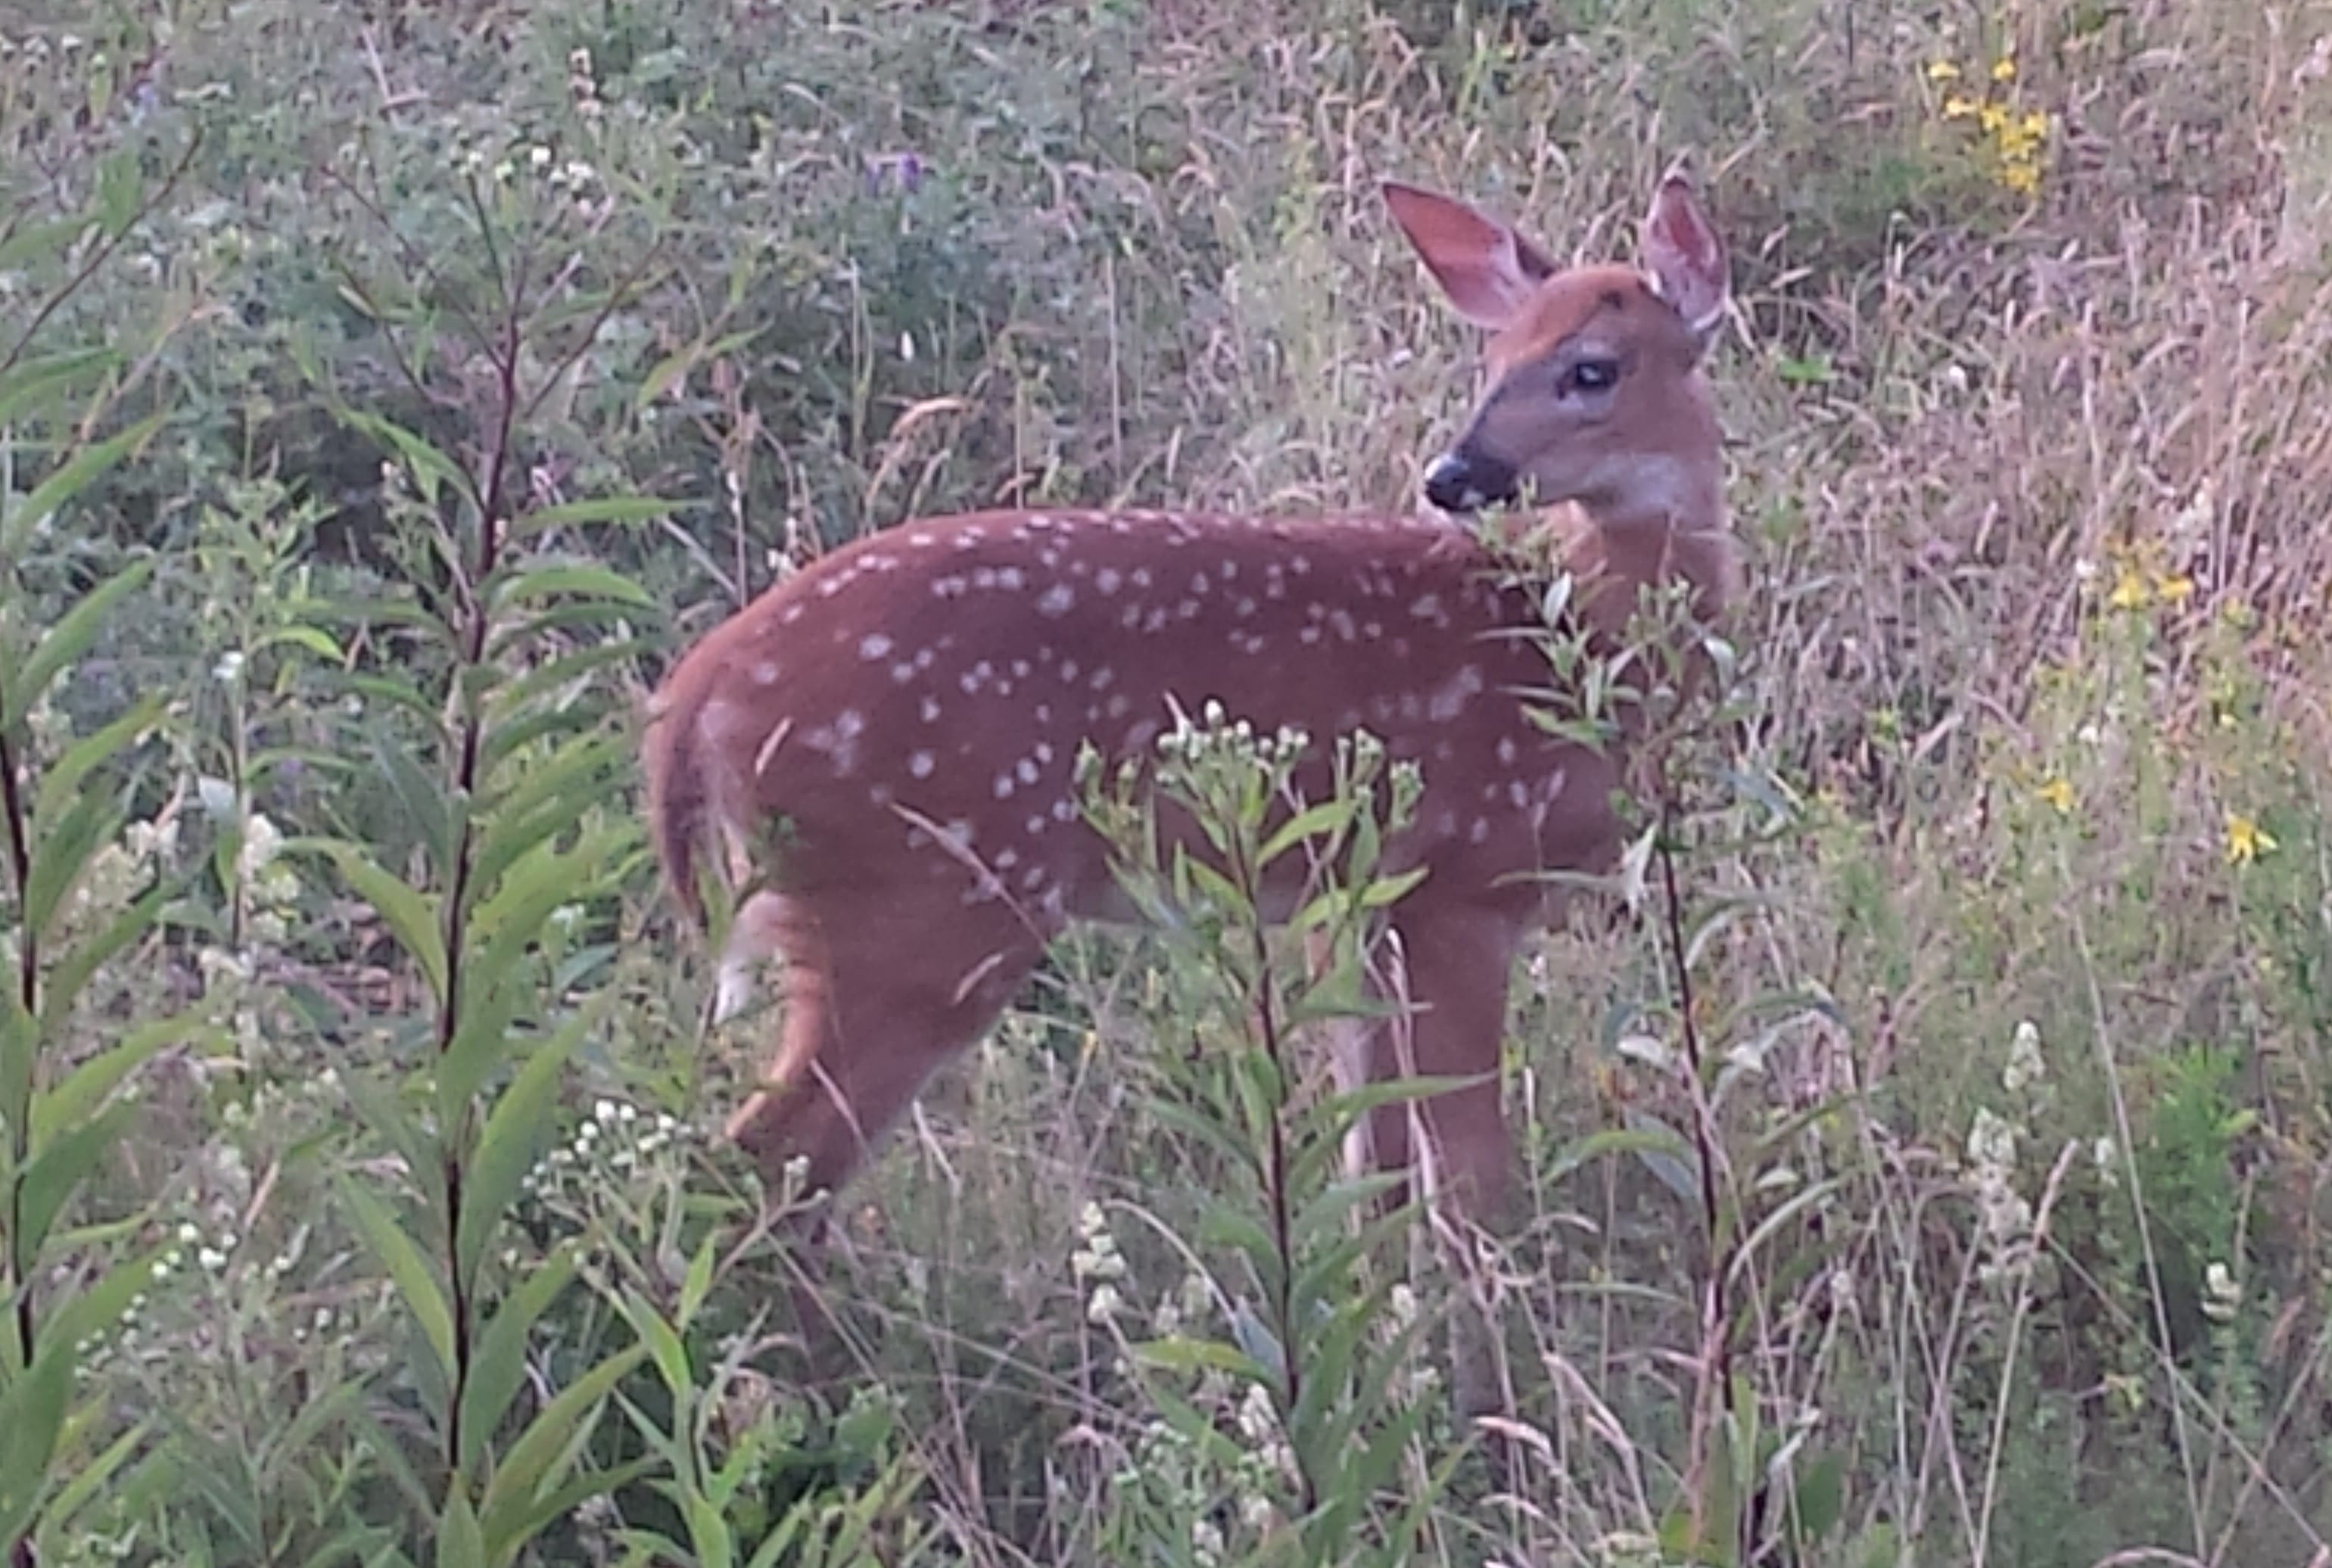 Baby deer with spots enjoying the meadow